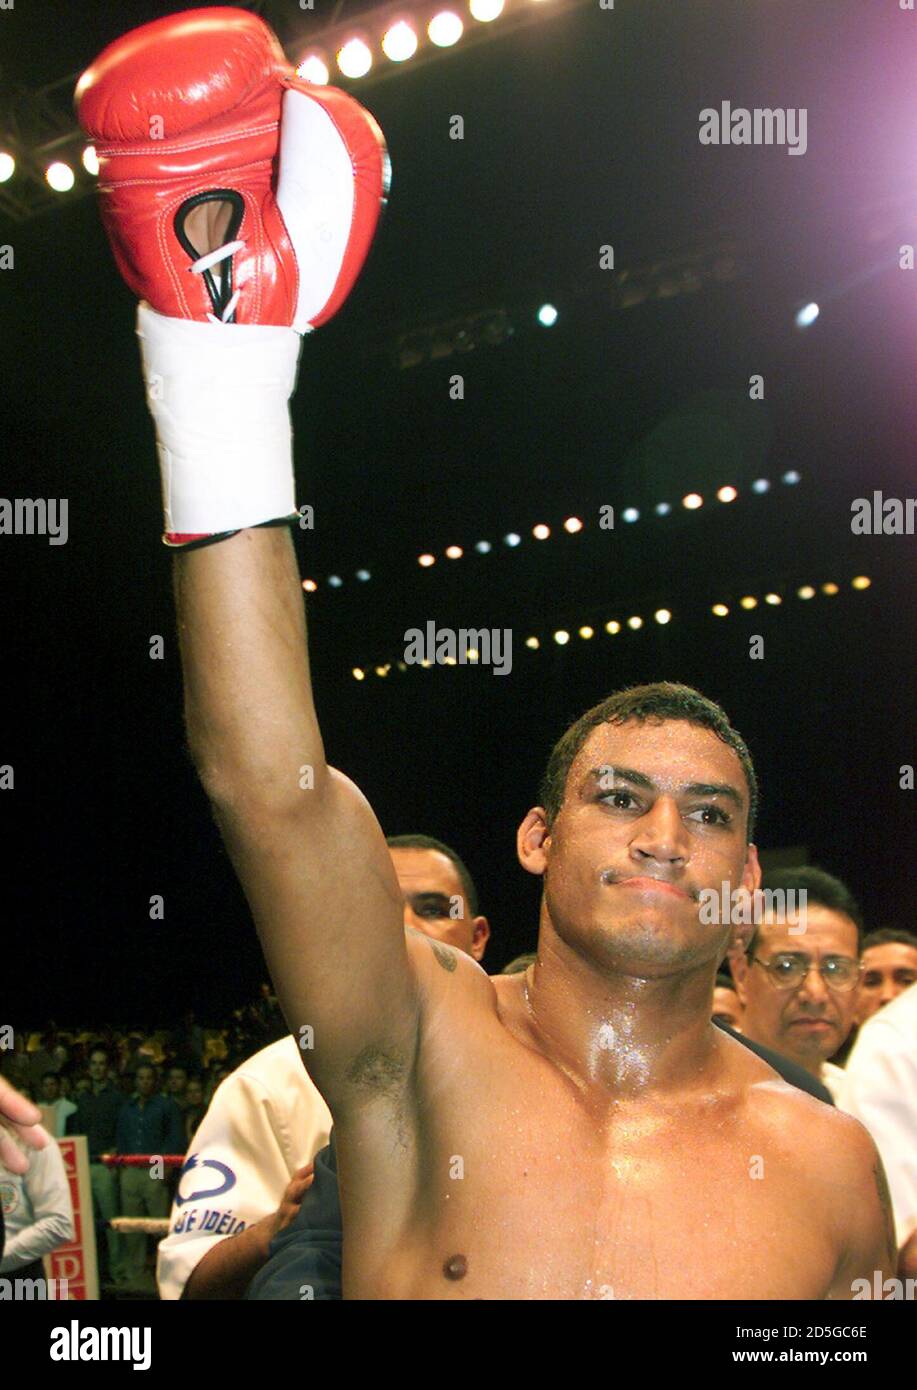 Champion Acelino Popo de Freitas celebrates after he knocked out Mexican  challenger Javier Jauregui during the (WBO) World Organization of Box super  feather weight title bout in Sao Paulo late March 18.